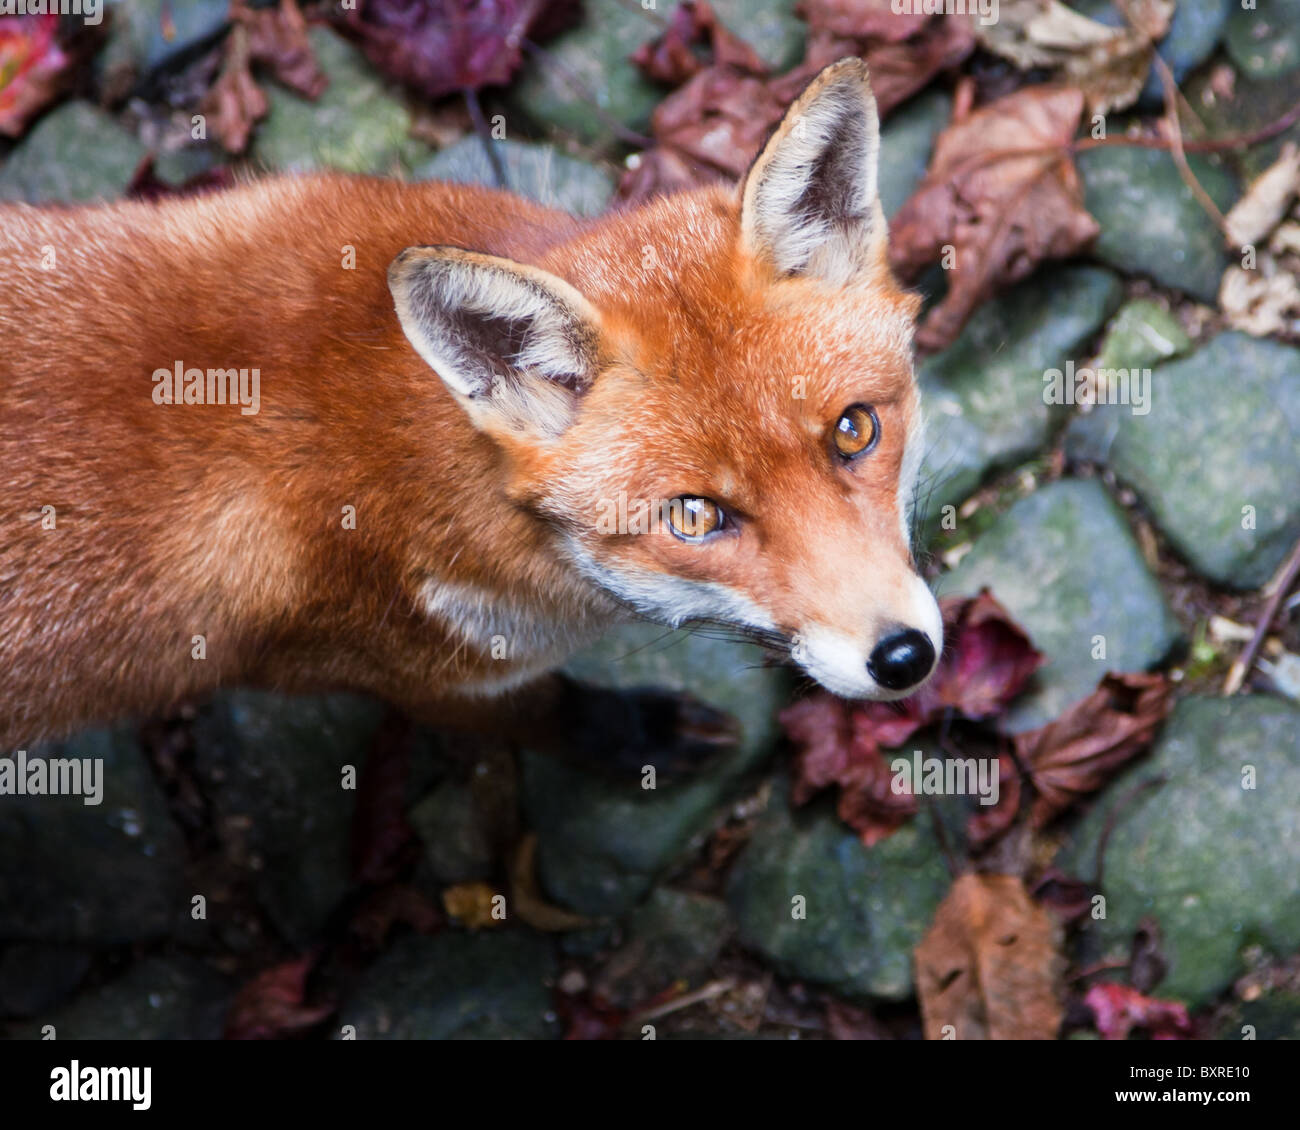 Red fox (UK) looking up at the camera walking on stone cobbles Stock Photo